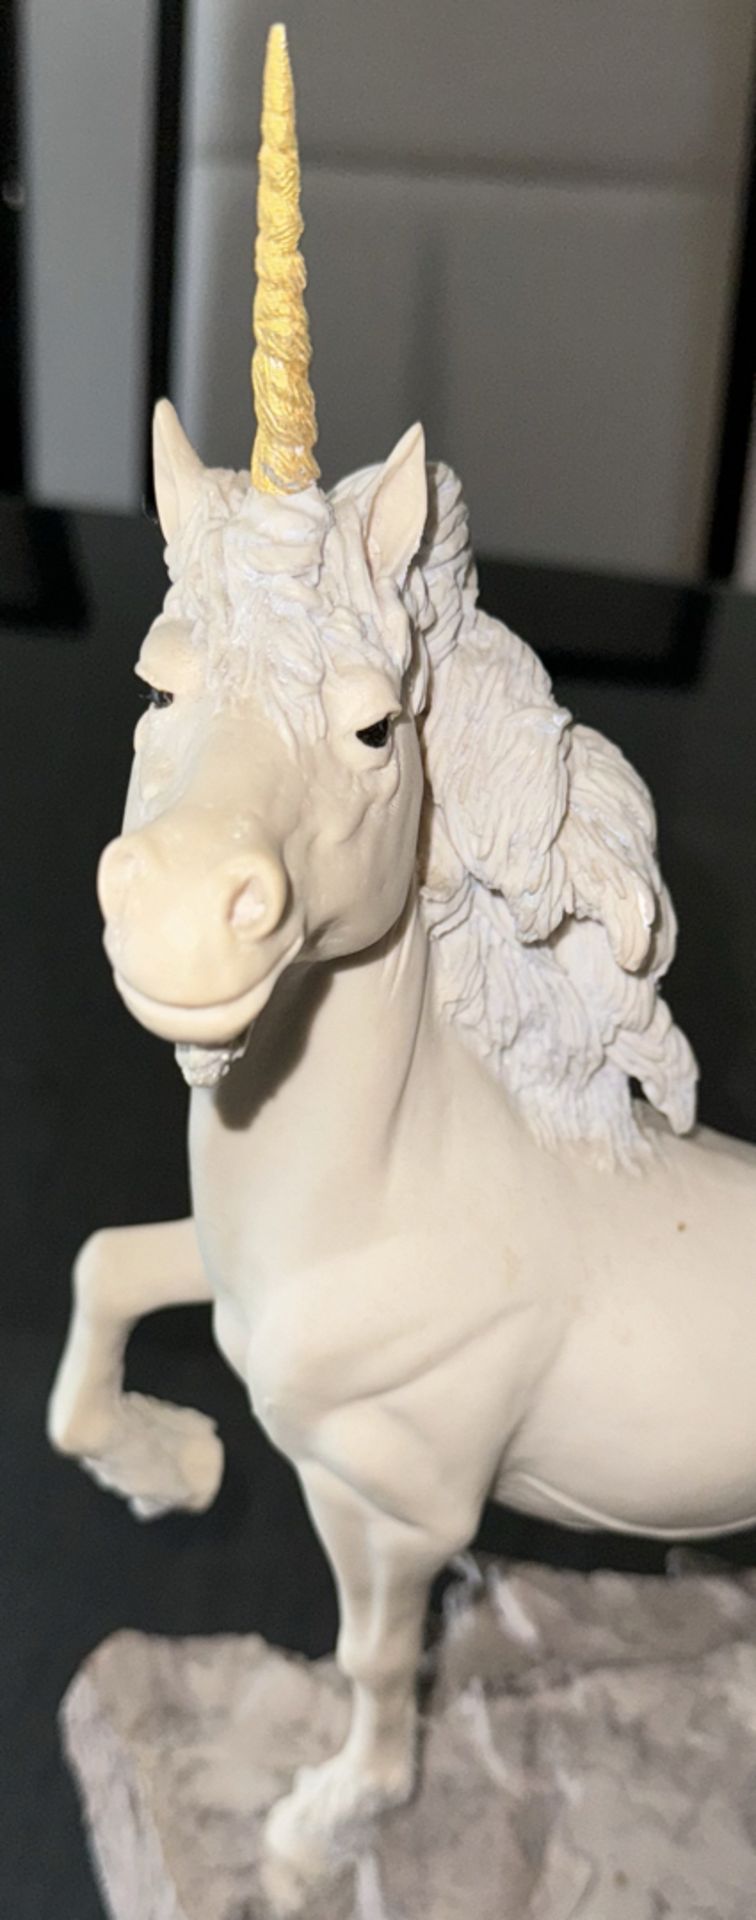 Royal Doulton Fables Unicorn Monarch - Rare Ltd Edition Sculpture with Framed COA - Image 3 of 9